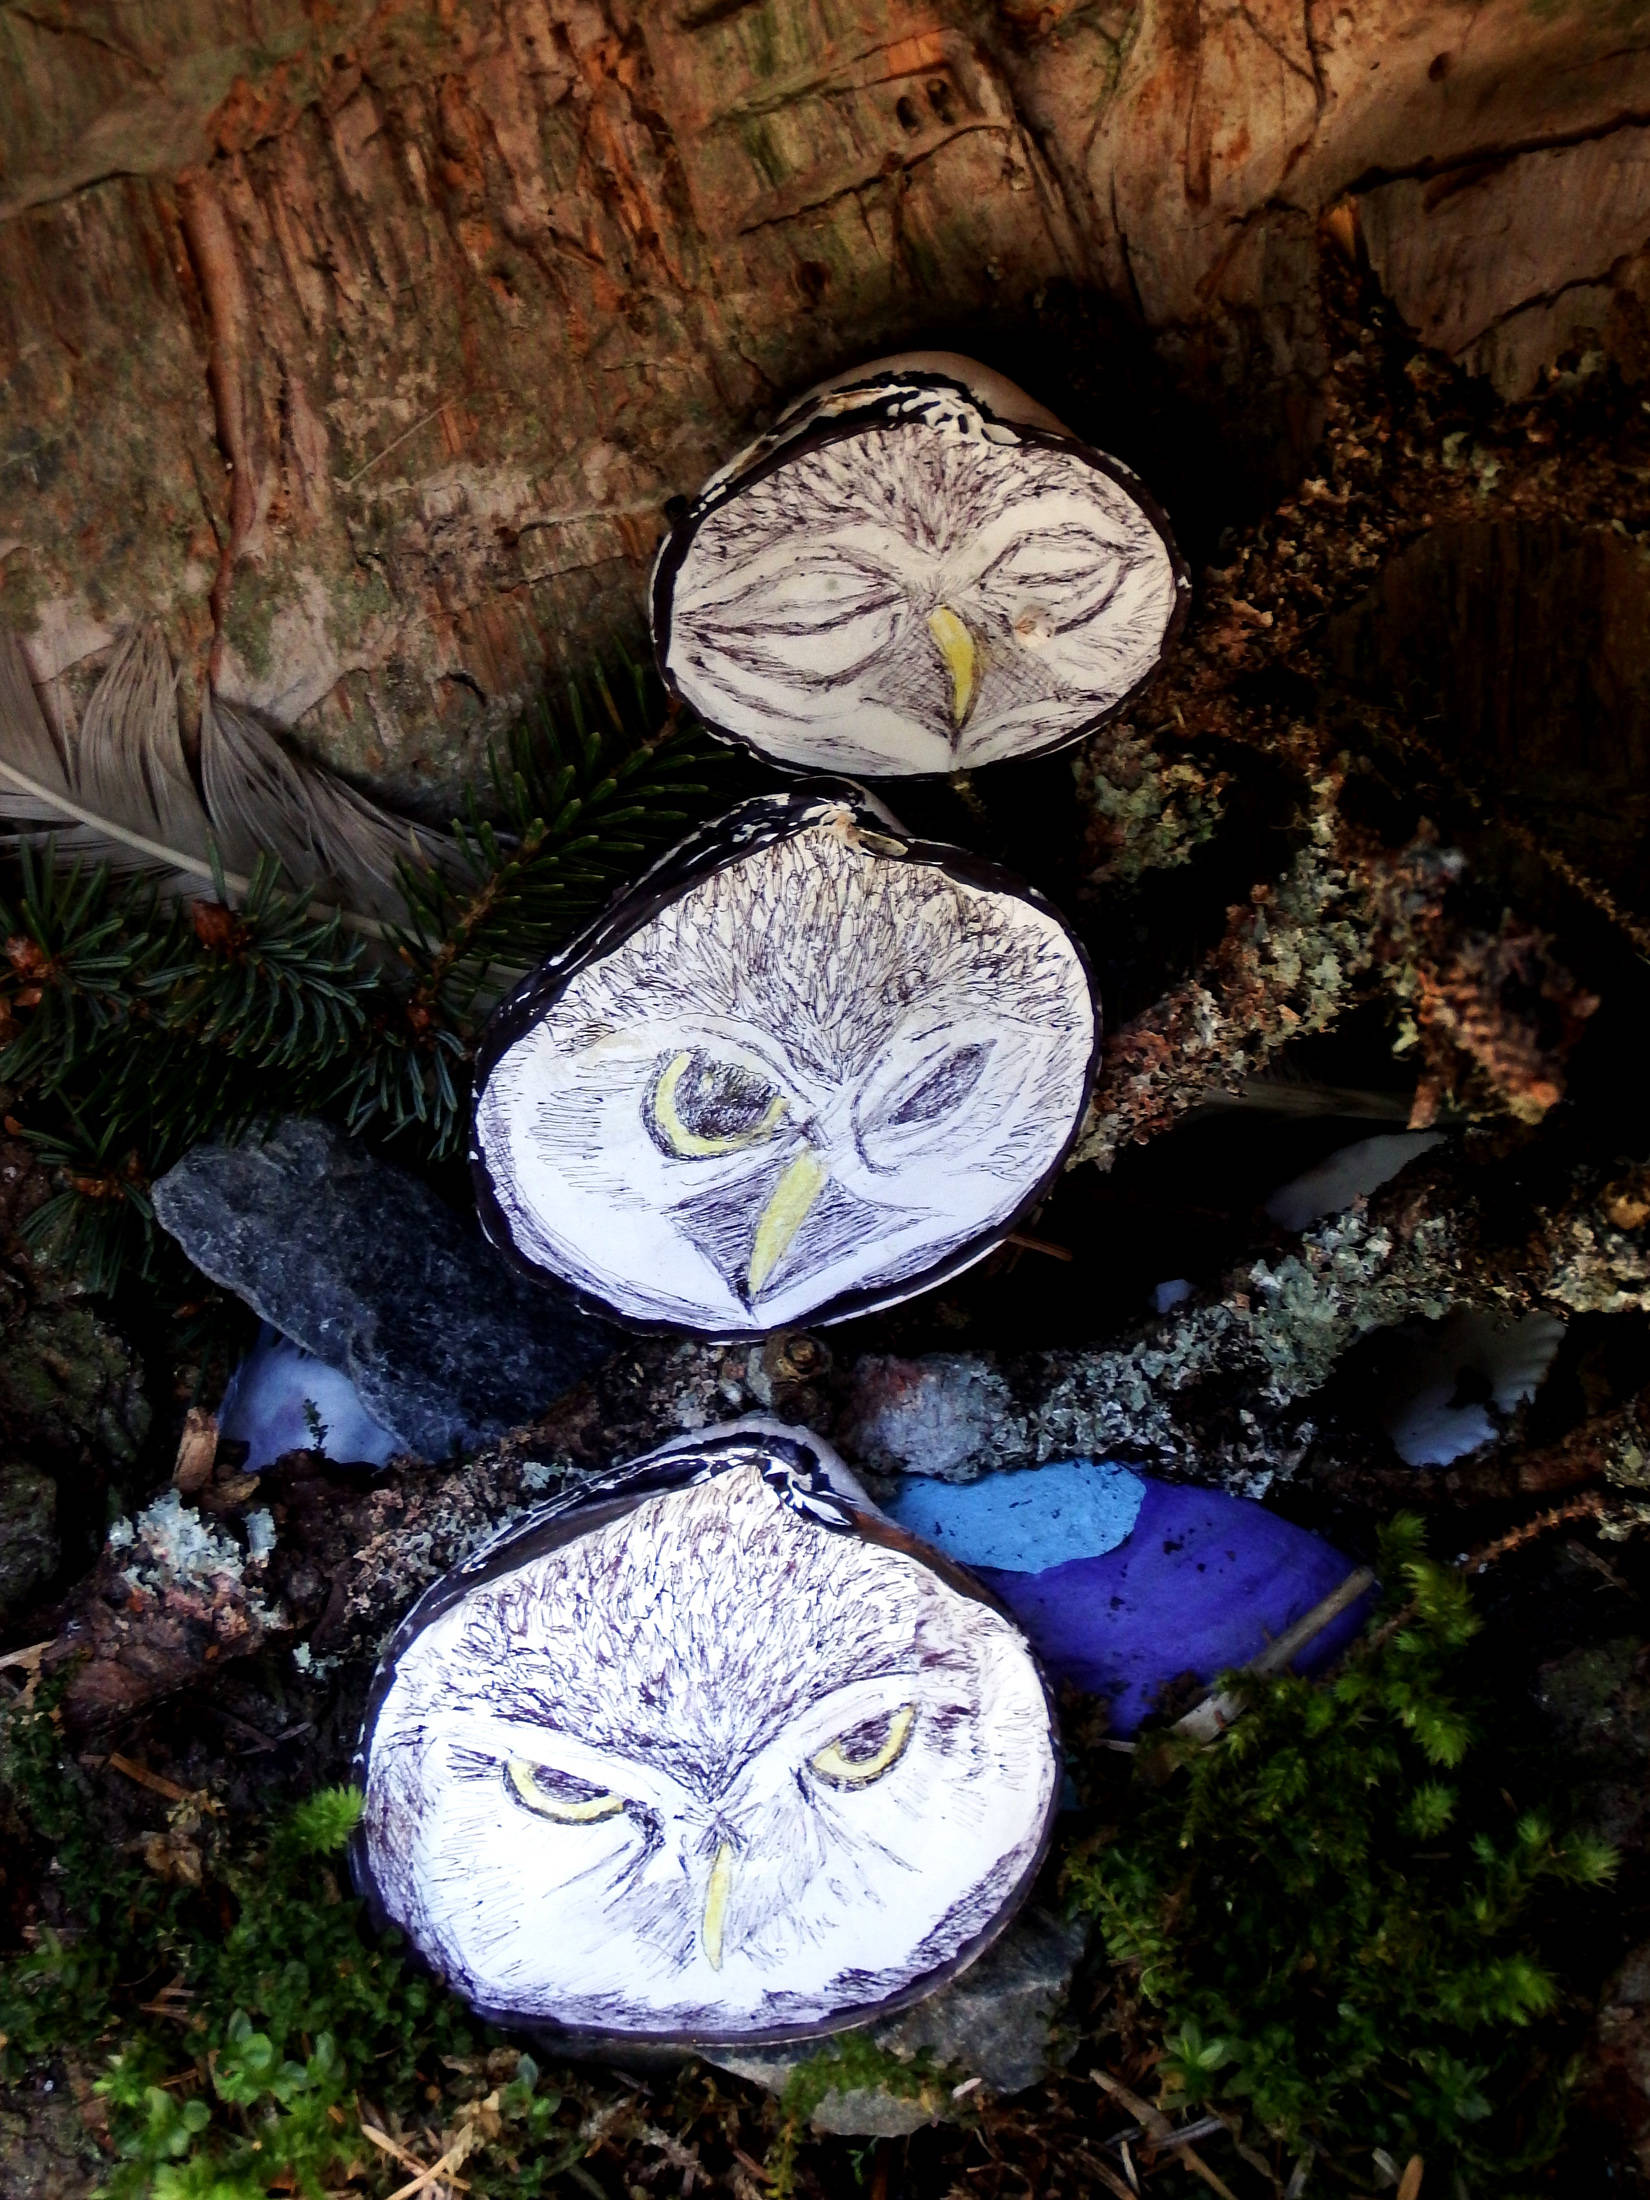 Owl faces in the hollow of a tree, by an unknown artist, along Point Louisa trail on April 22. Photo by Linda Shaw.